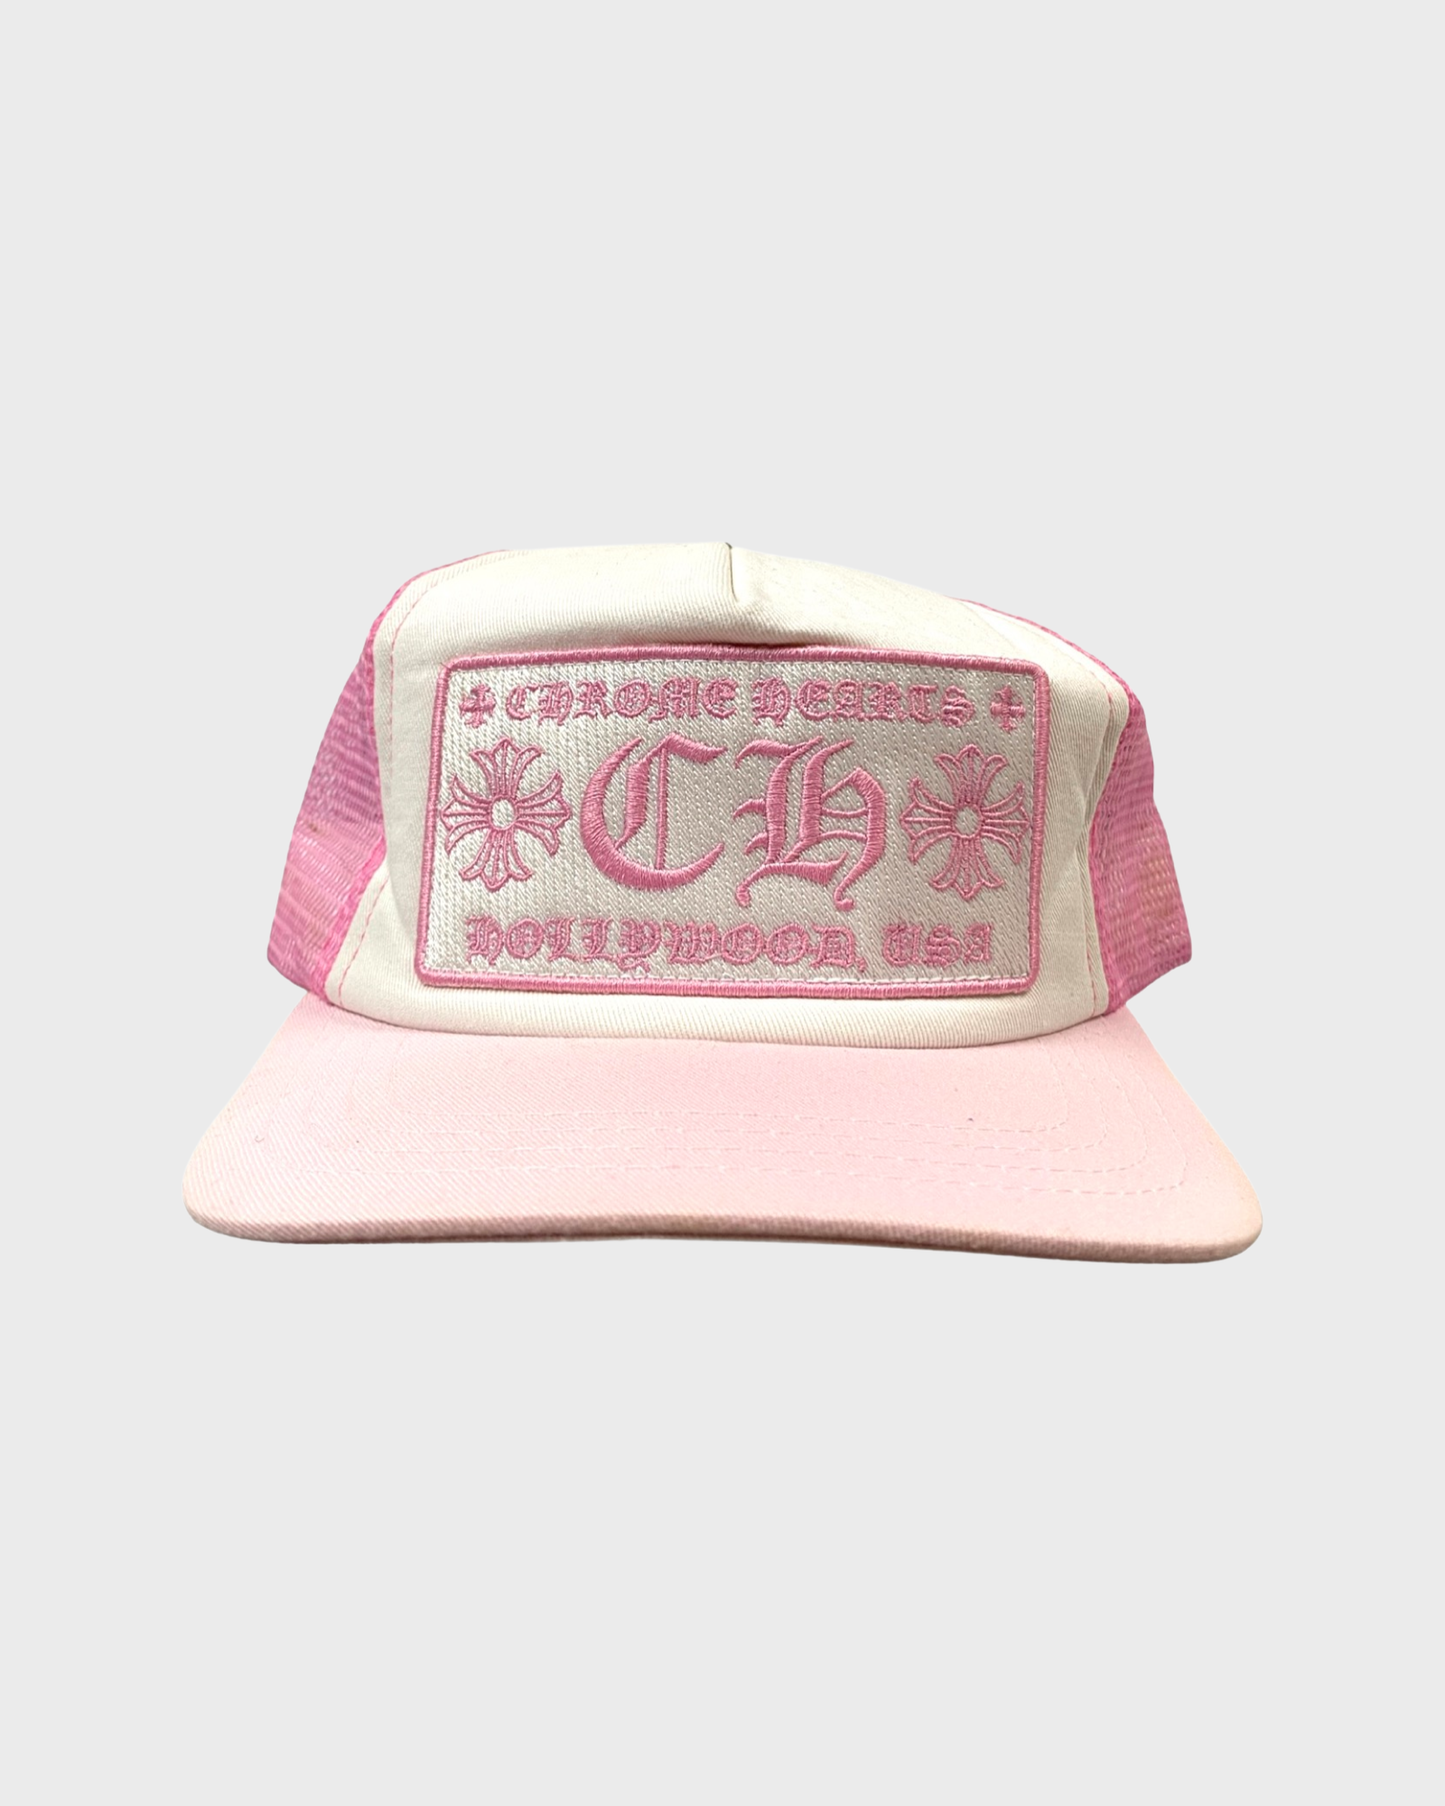 Chrome Hearts Cap / Hat in Pink SZ:OS